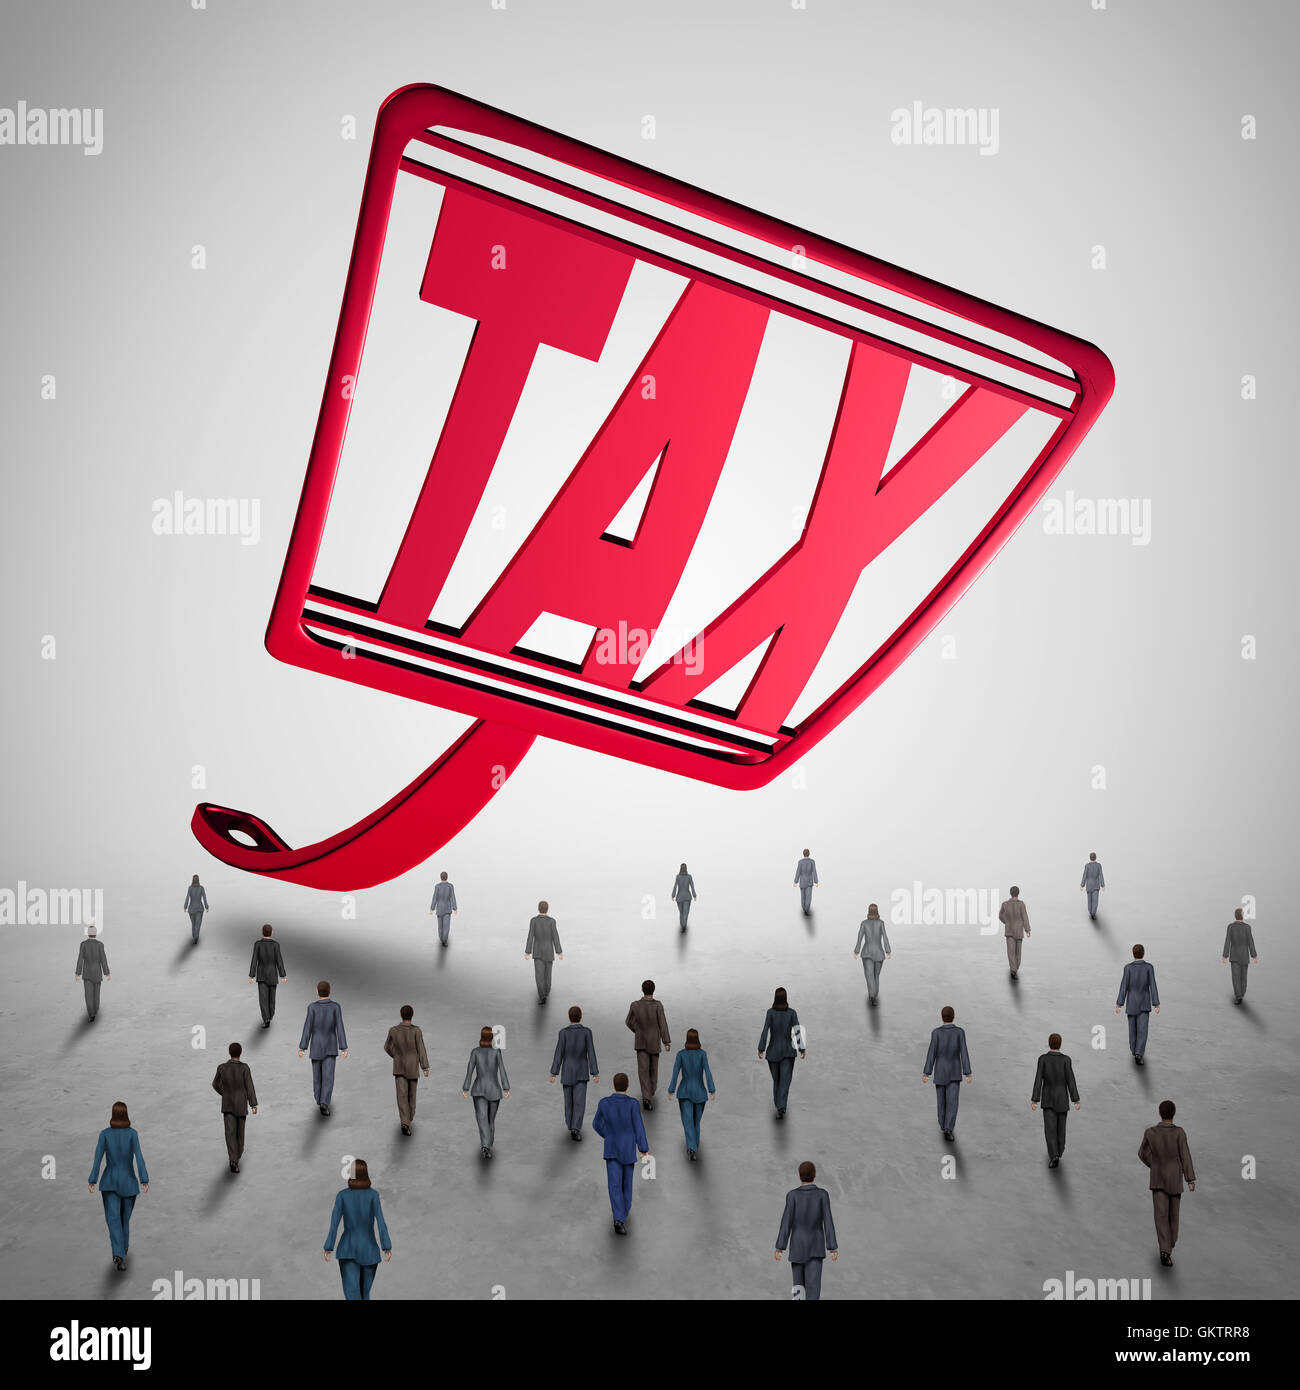 High tax challenge and business taxes concept as a fly swatter with text challenging a group of people as a financial accounting symbol for taxation law issues and debt danger with 3D illustration elements. Stock Photo